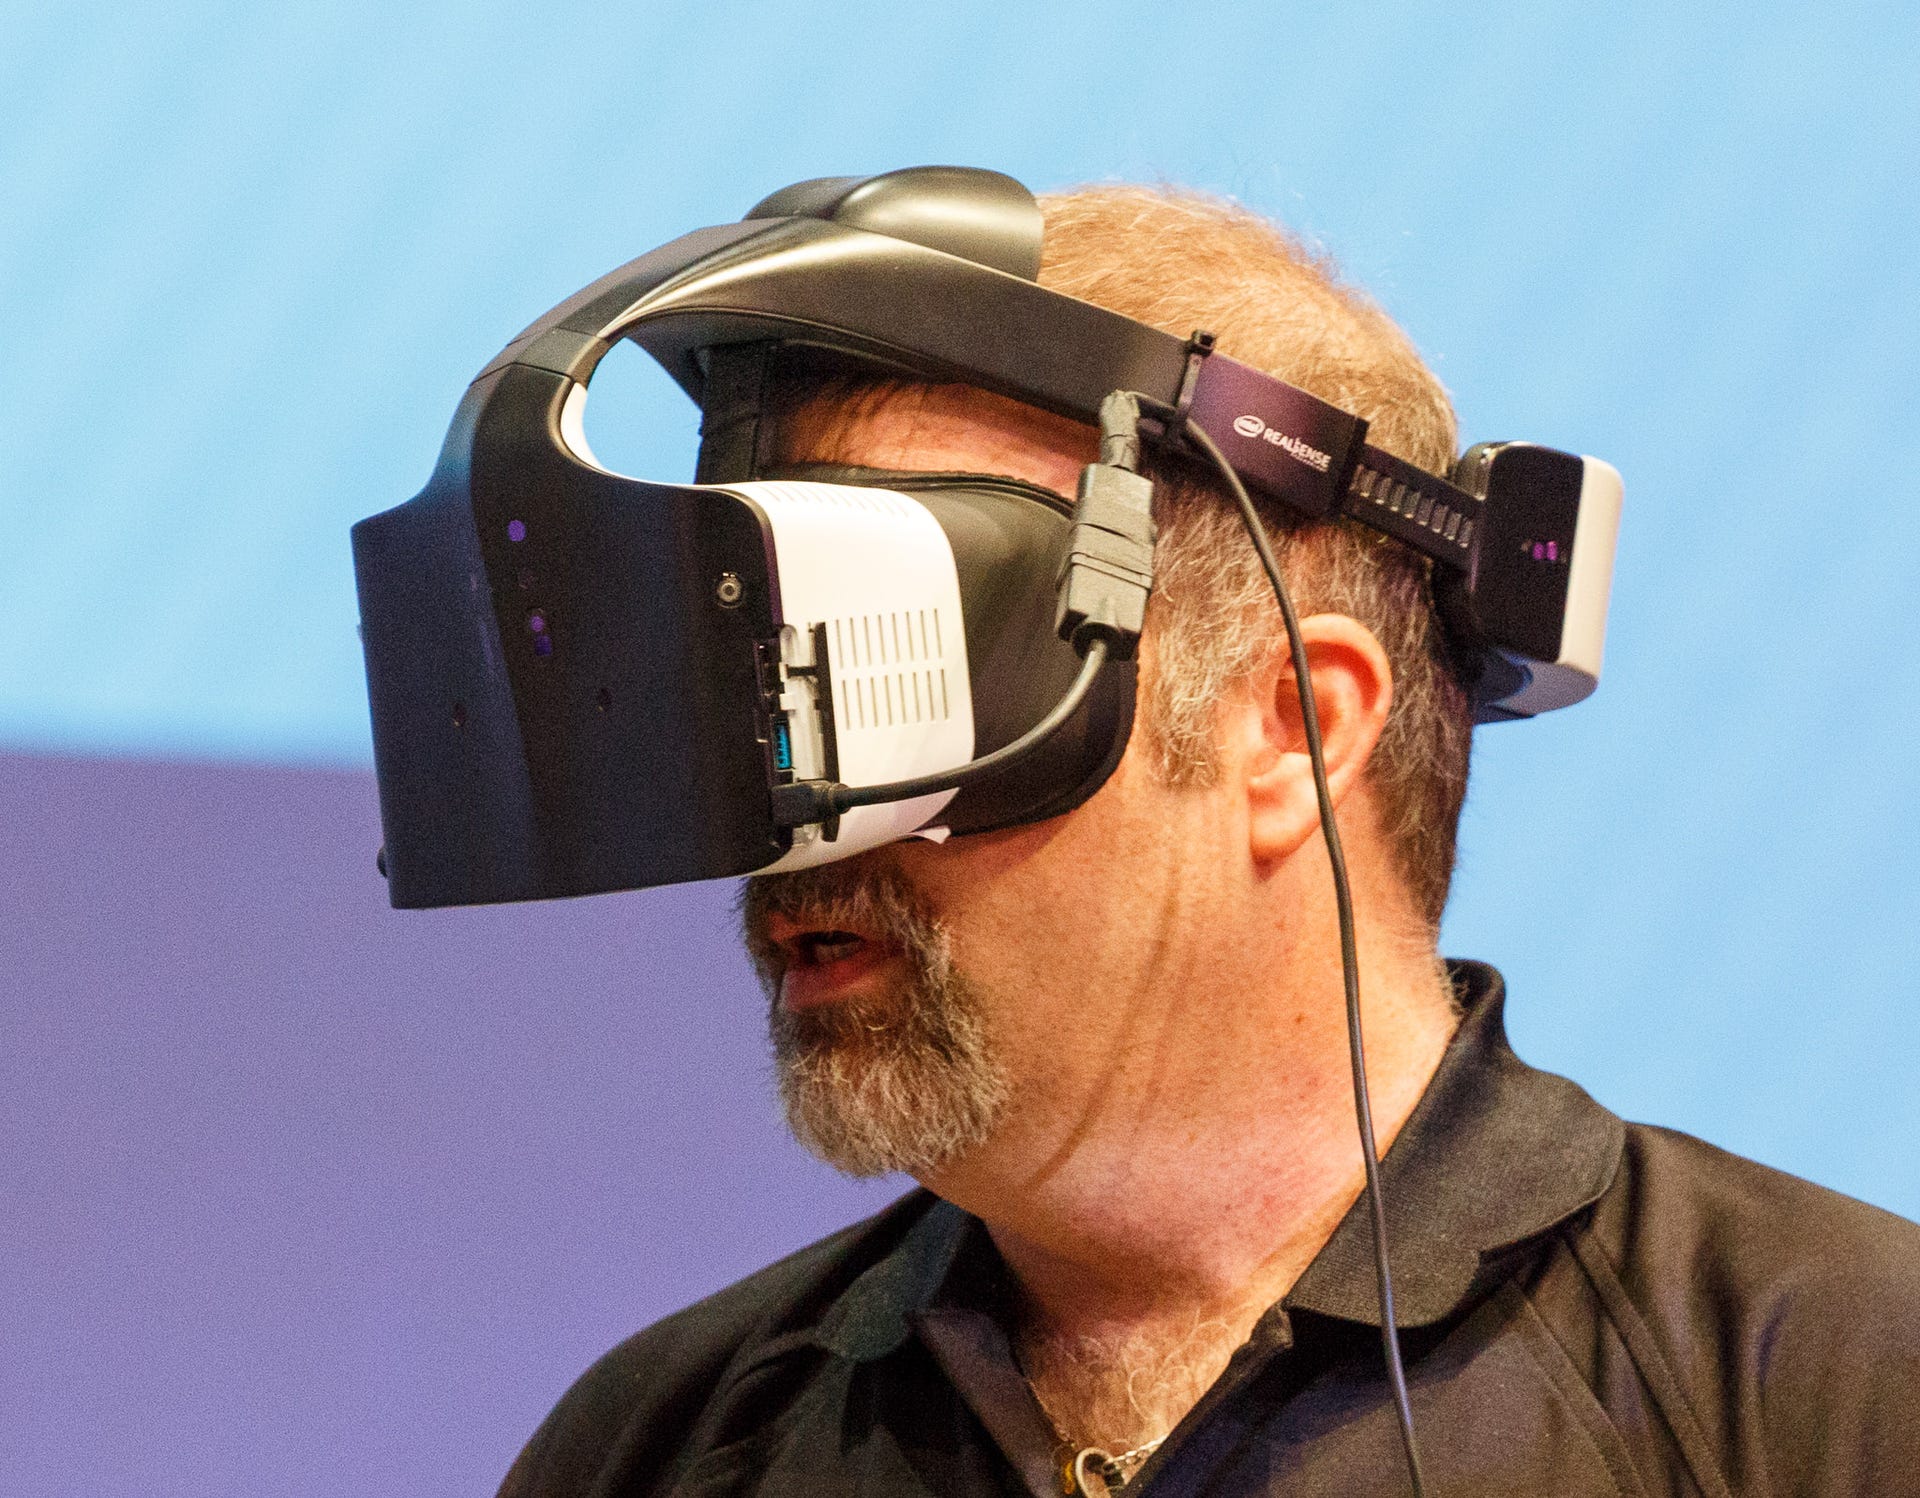 Intel's Alloy headset, unveiled earlier this year, aims to offer VR without ungainly cables hooked up to a PC.